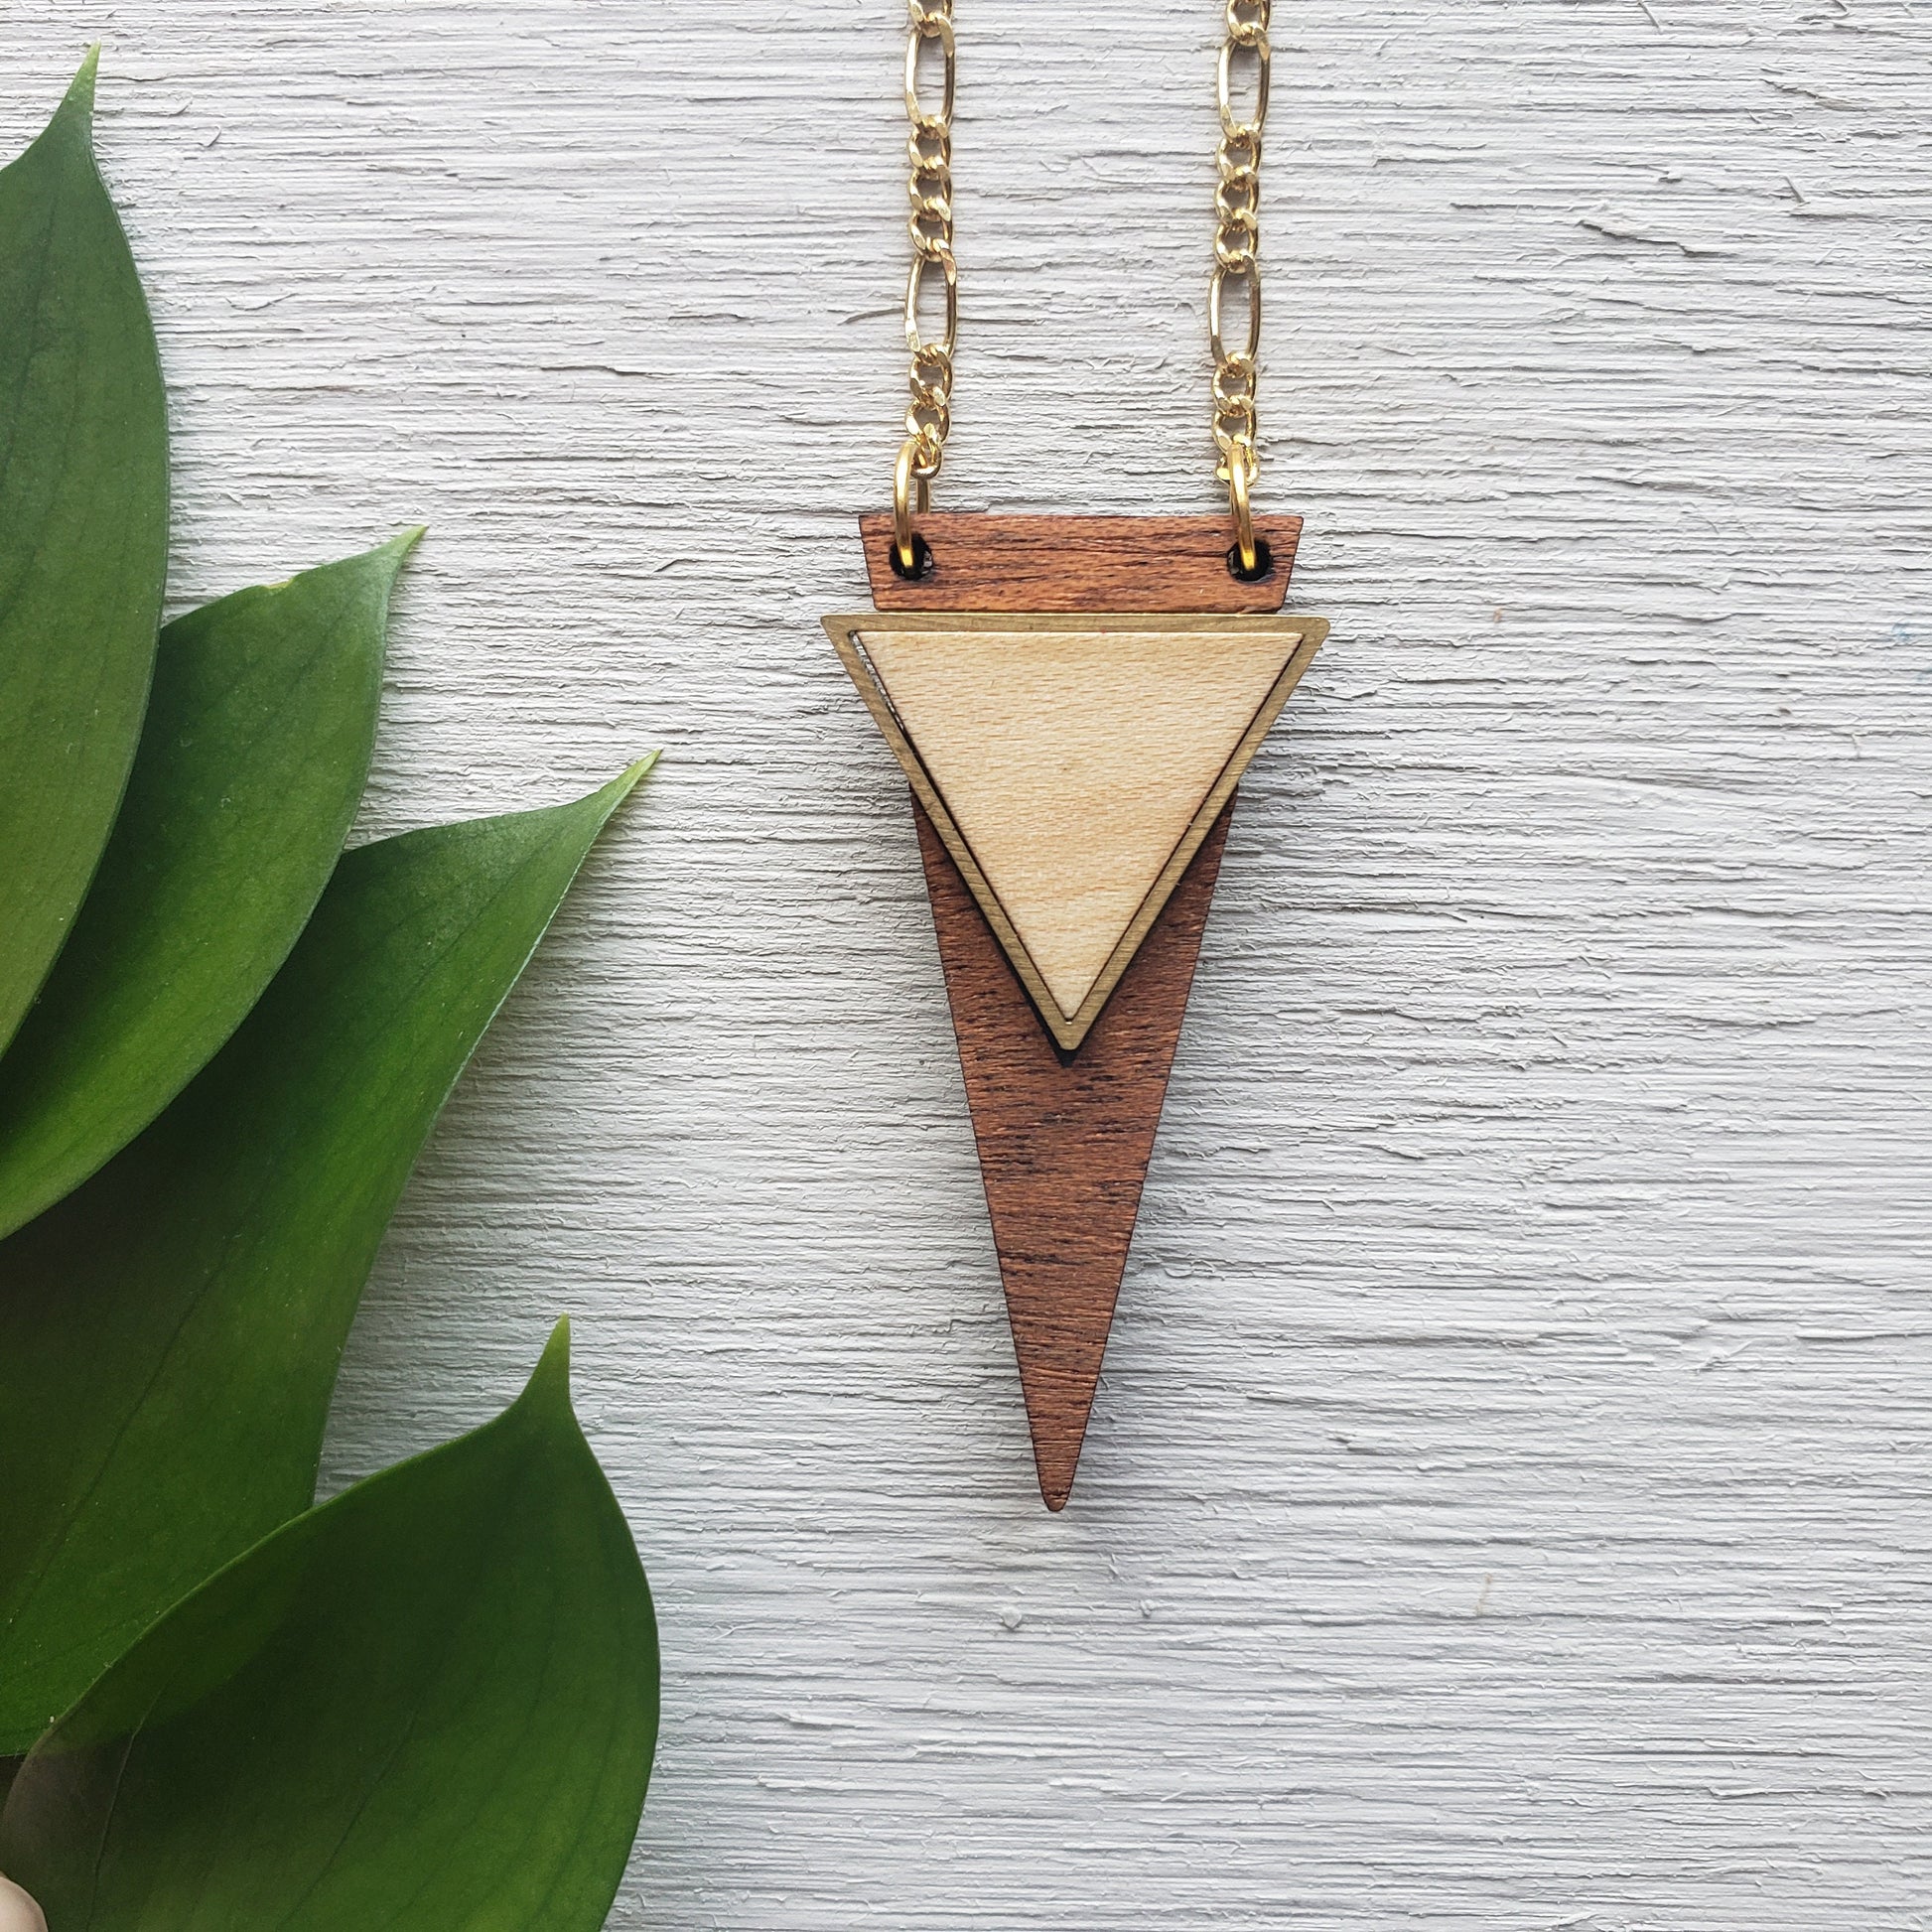 Inlaid Triangle - Laser Cut Wood Necklace || Geometric Jewelry || 5th Anniversary Gift for her || Gift for Girlfriend